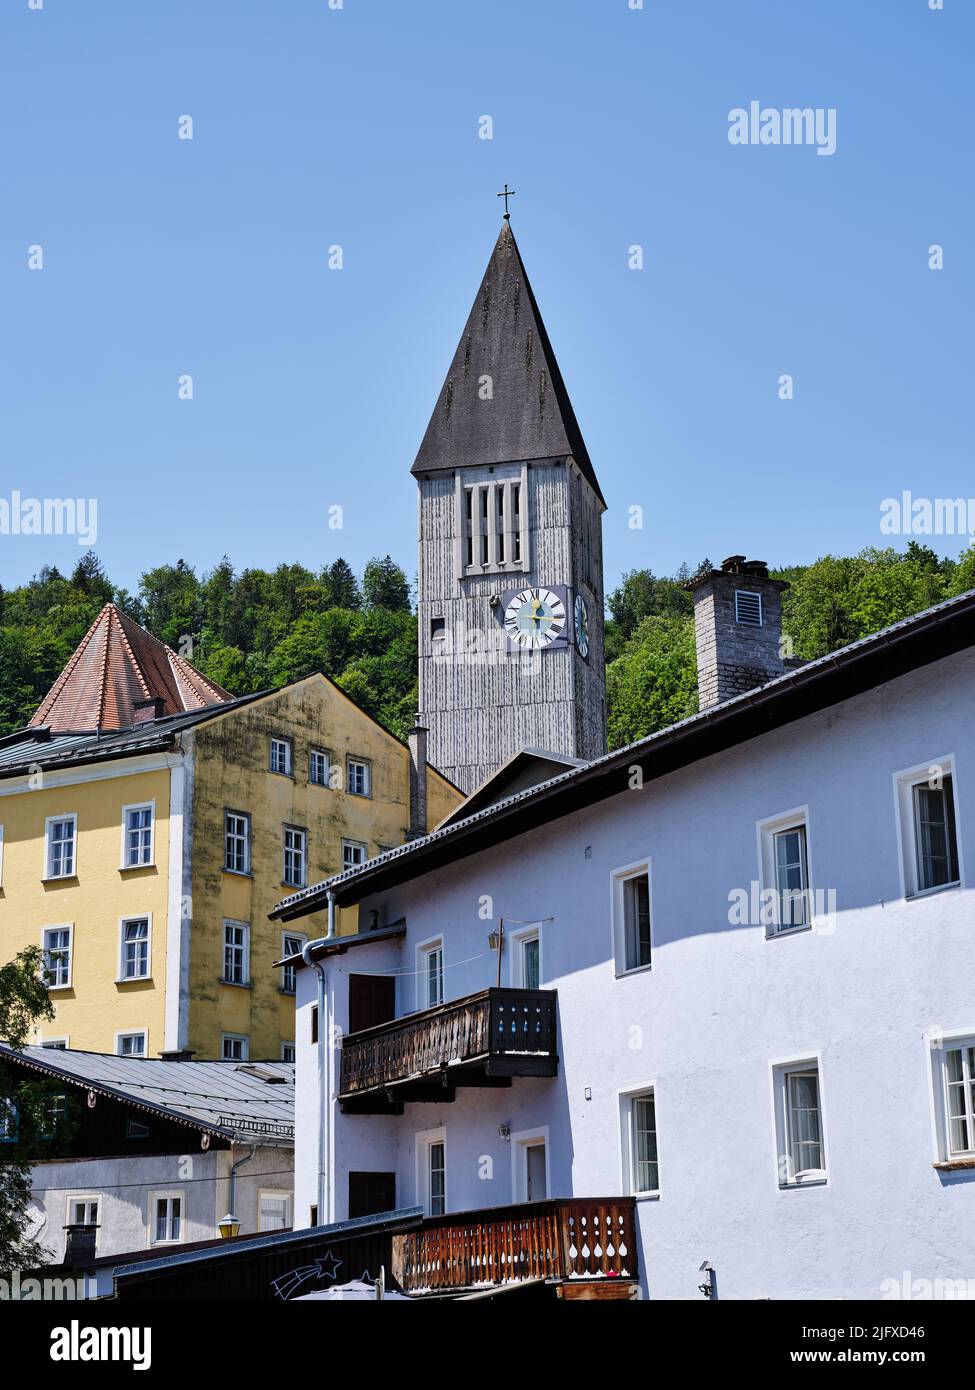 Houses and church tower in Hallein, Austria Stock Photo